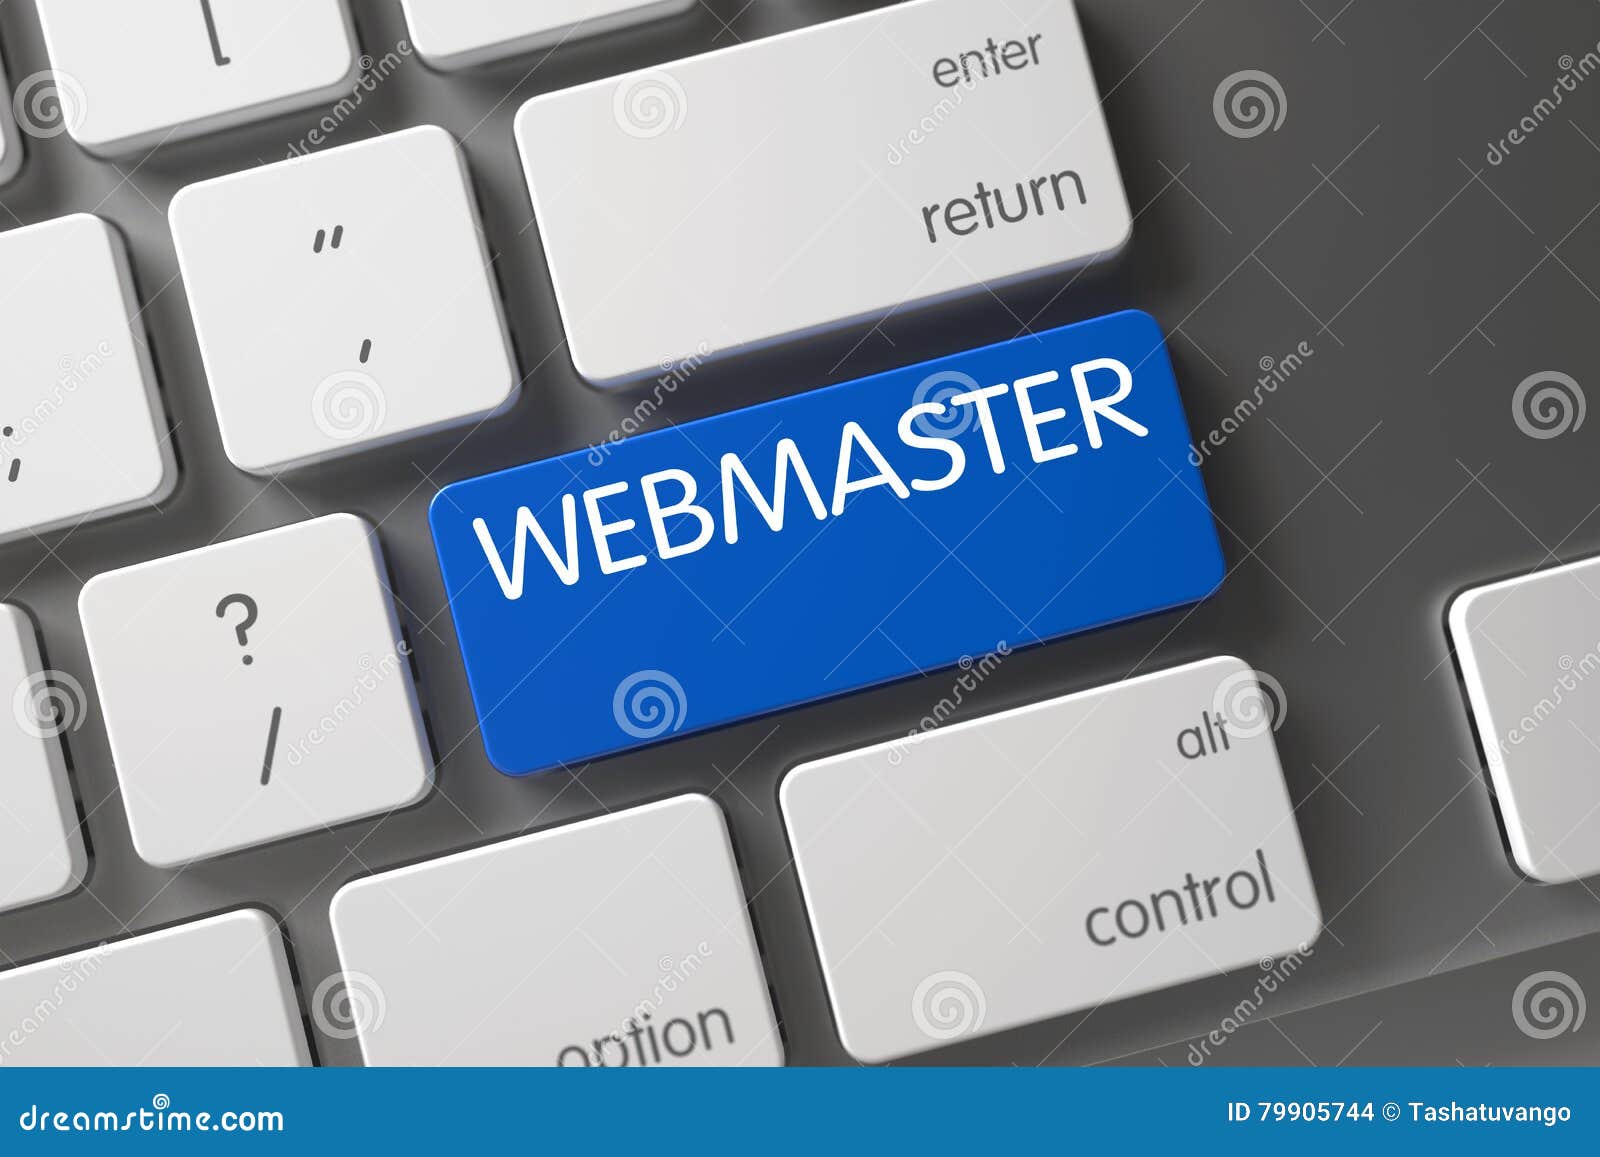 keyboard with blue button - webmaster. 3d.